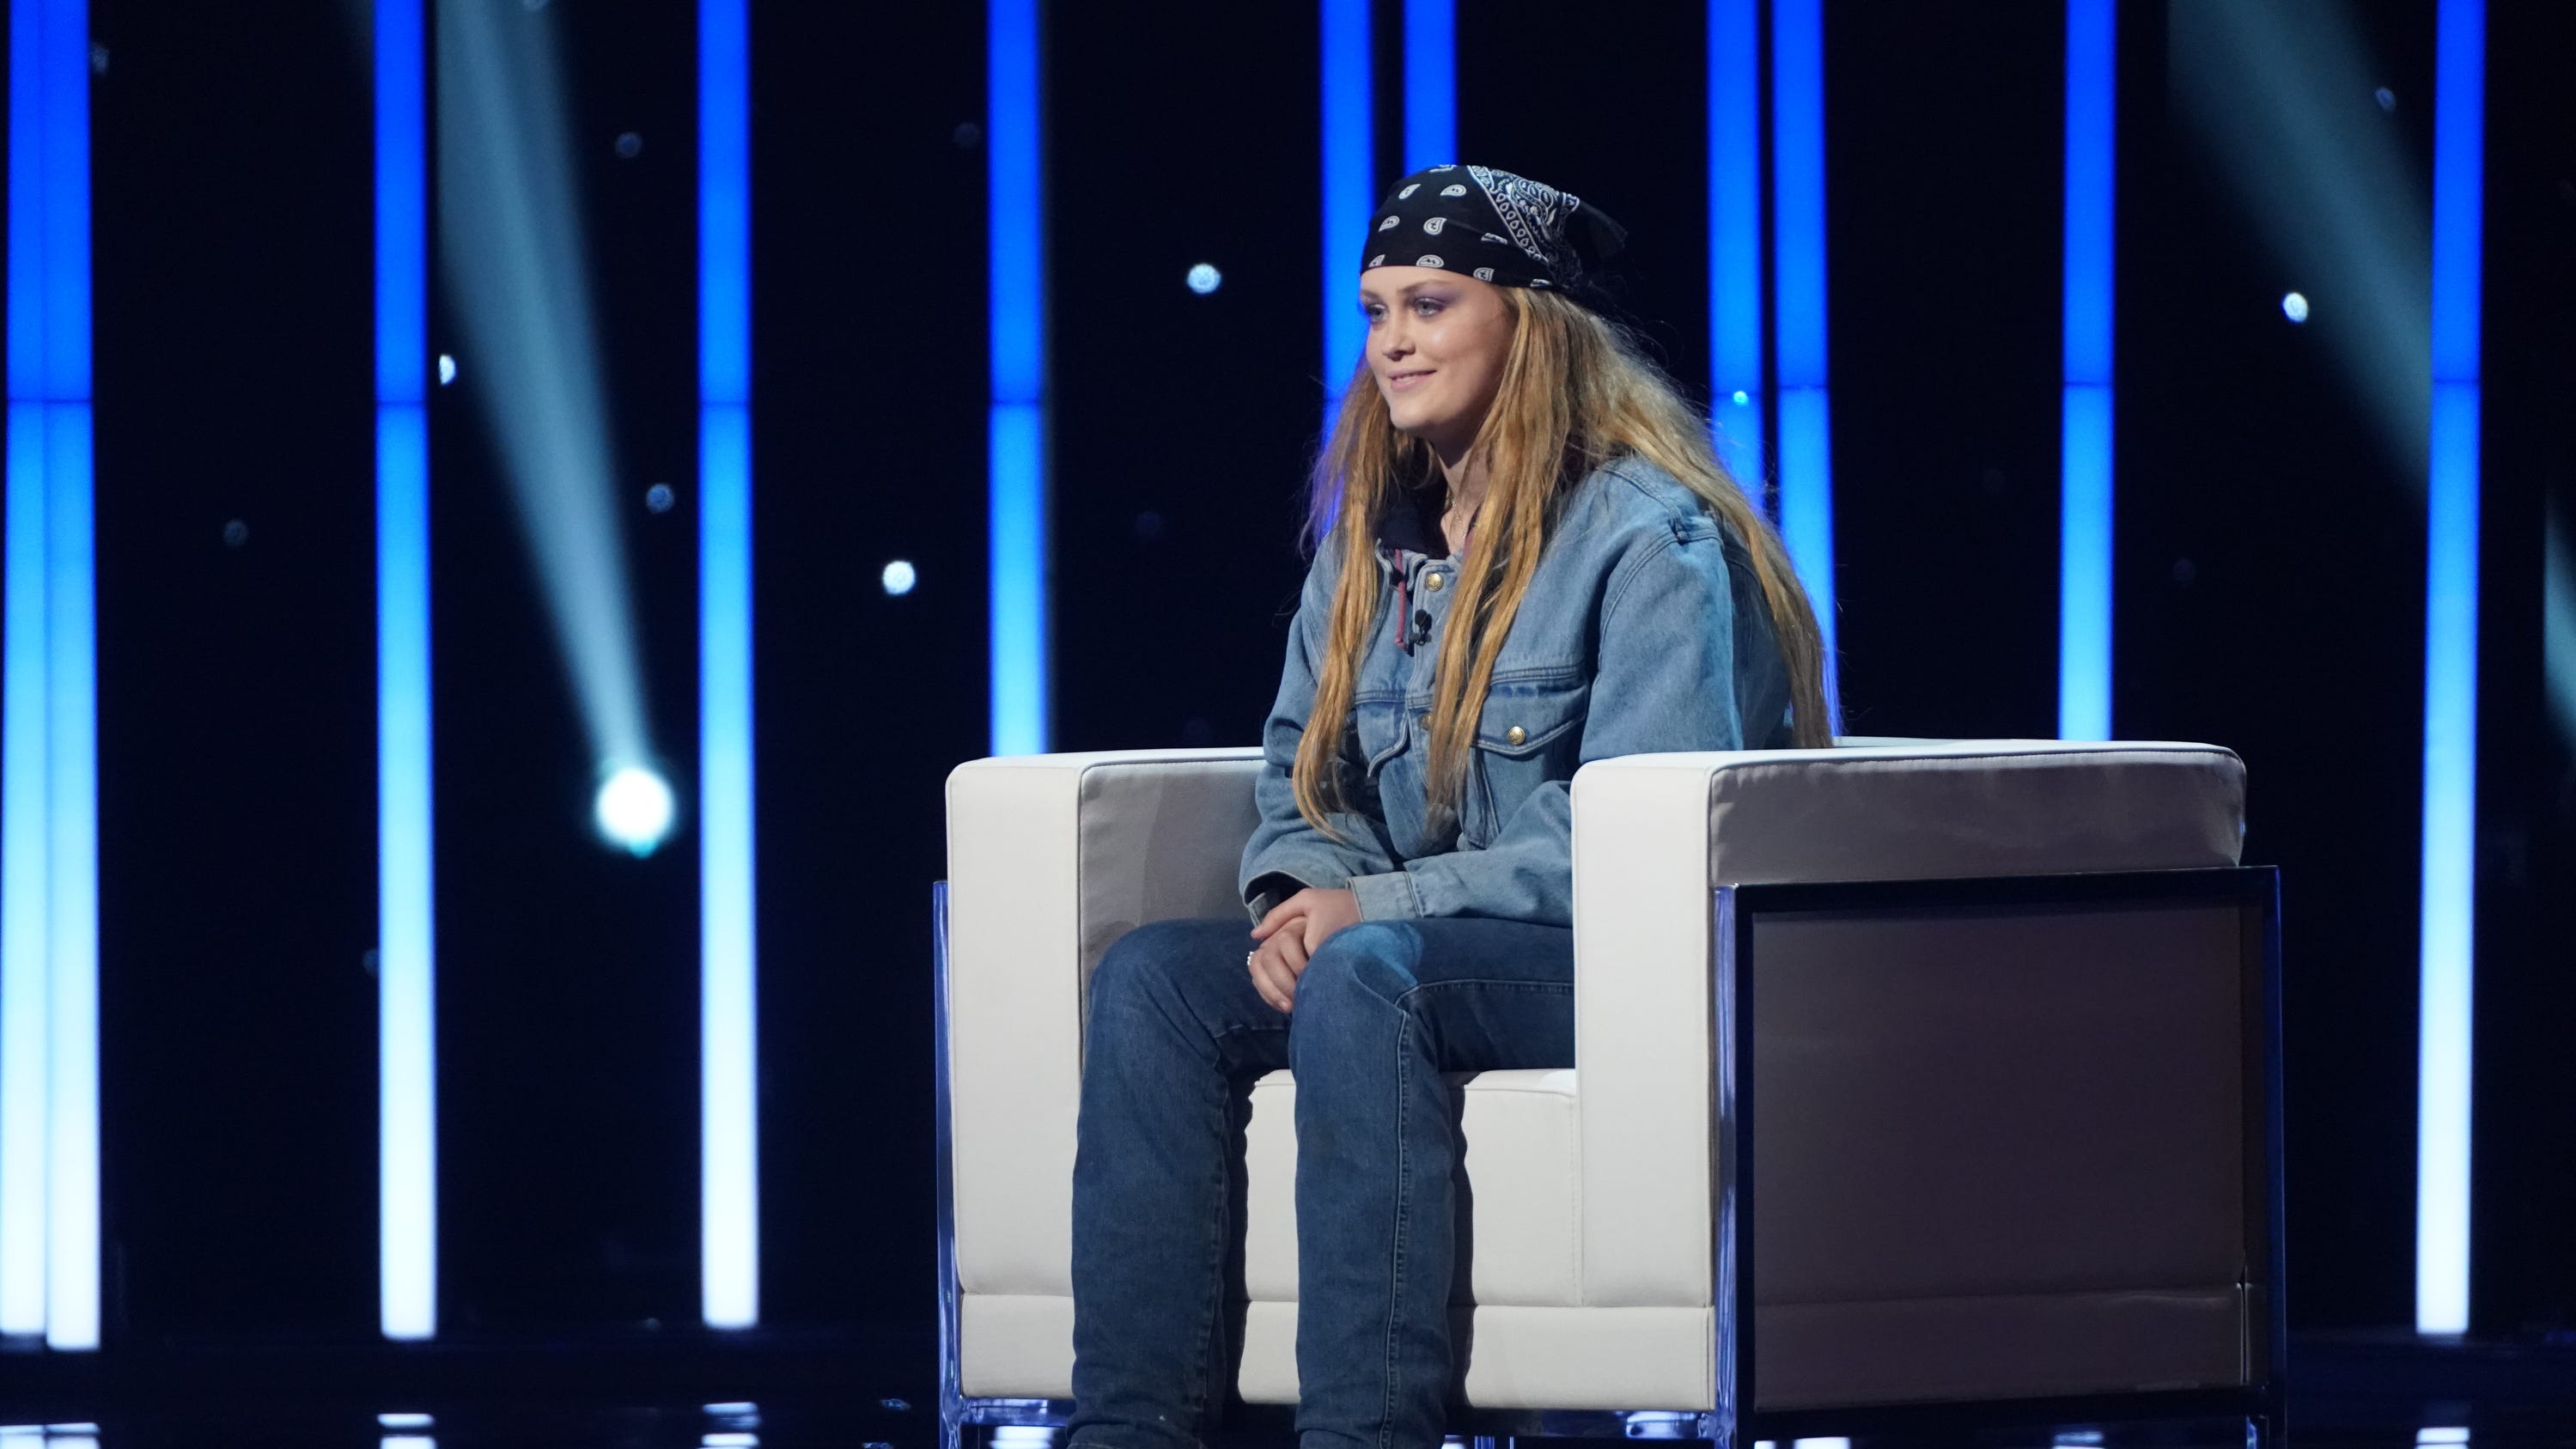 'American Idol' showstopper round begins Is your favorite in top 24?